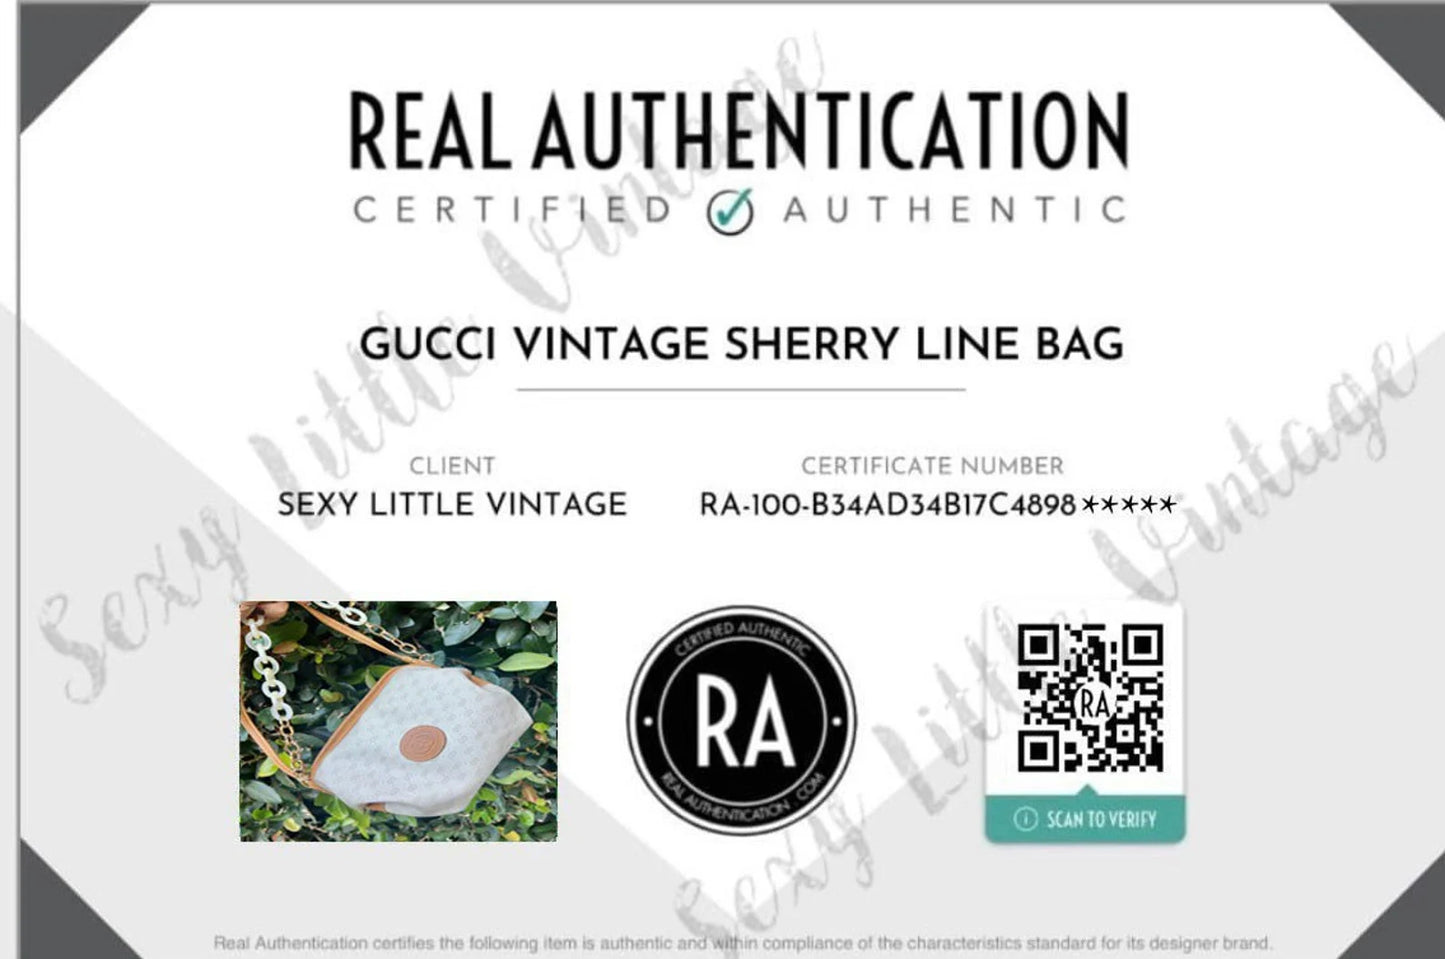 GUCCI CERTIFIED AUTHENTIC VINTAGE Crossbody Clutch - White Bag - GG